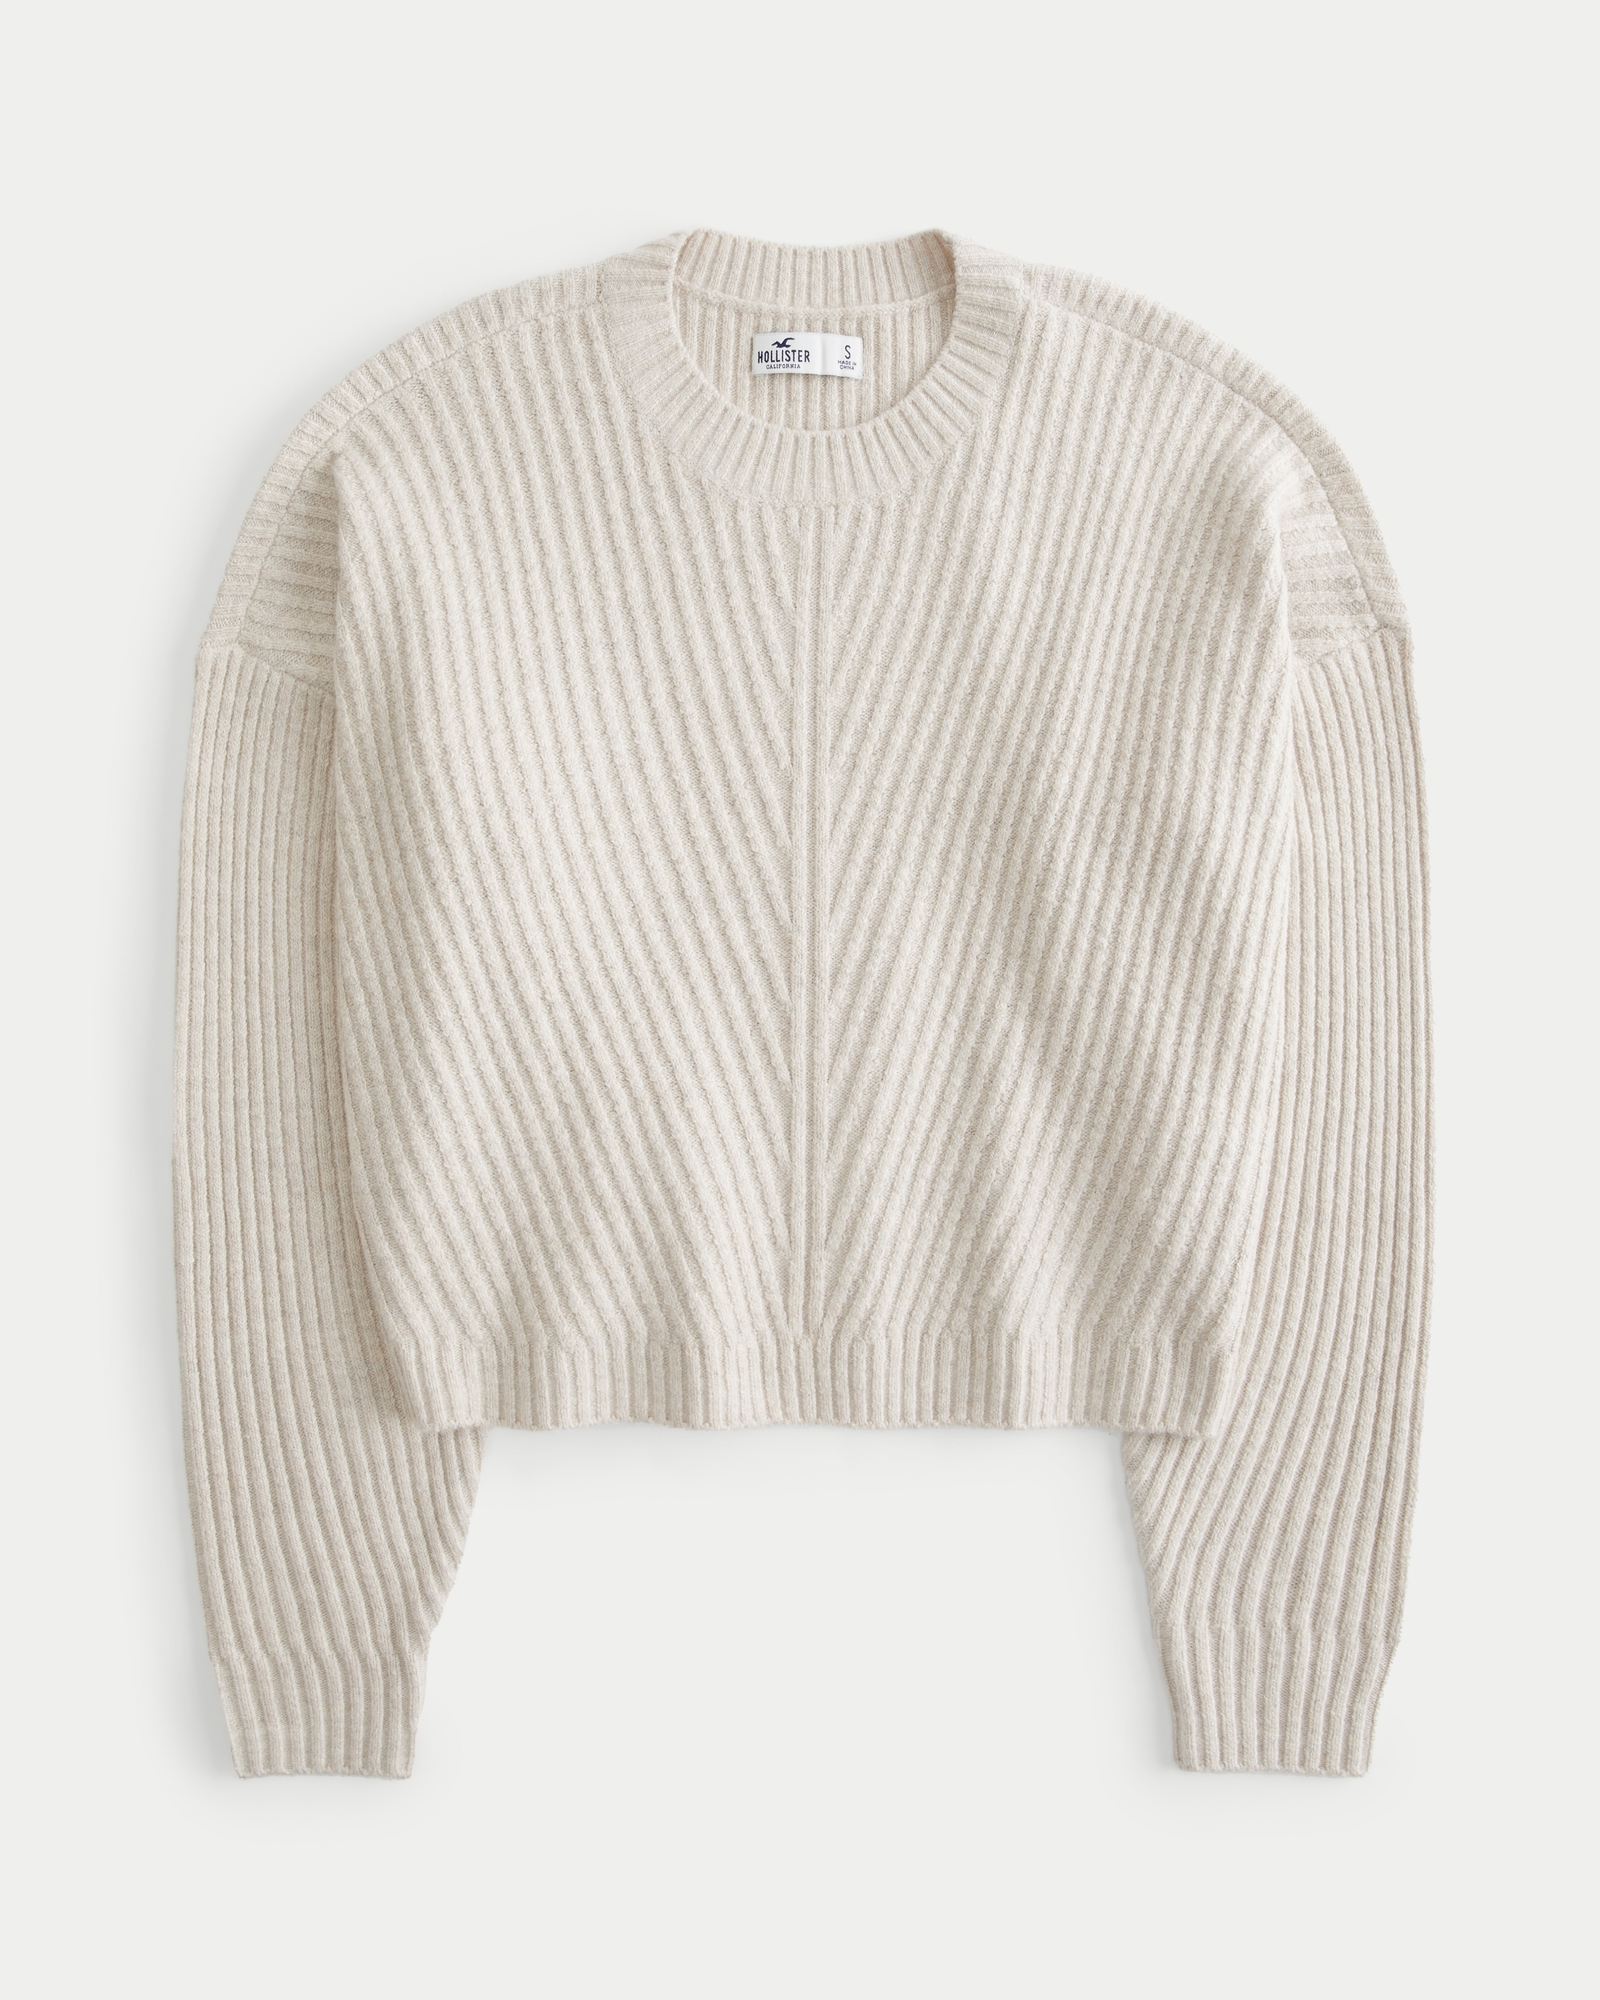 Hollister Big Comfy Sweater in White